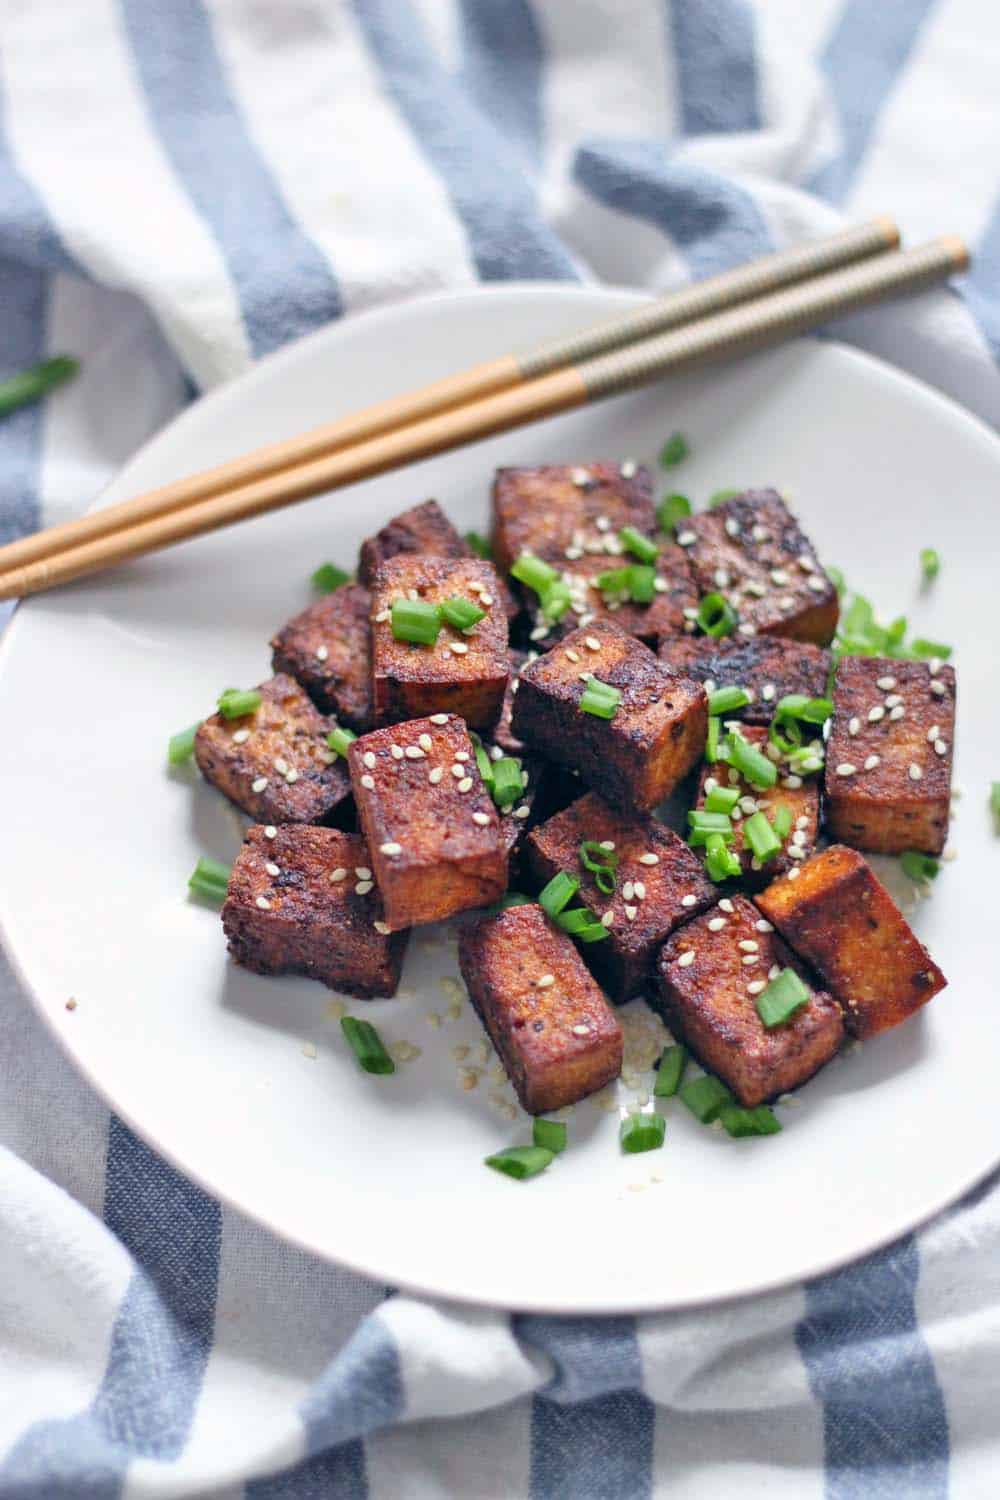 Pan Seared Soy Sauce and Black Pepper Tofu | This is the best and easiest way to prepare tofu that's crispy, simply flavored and salty, and goes with pretty much anything! No breading or deep frying required.